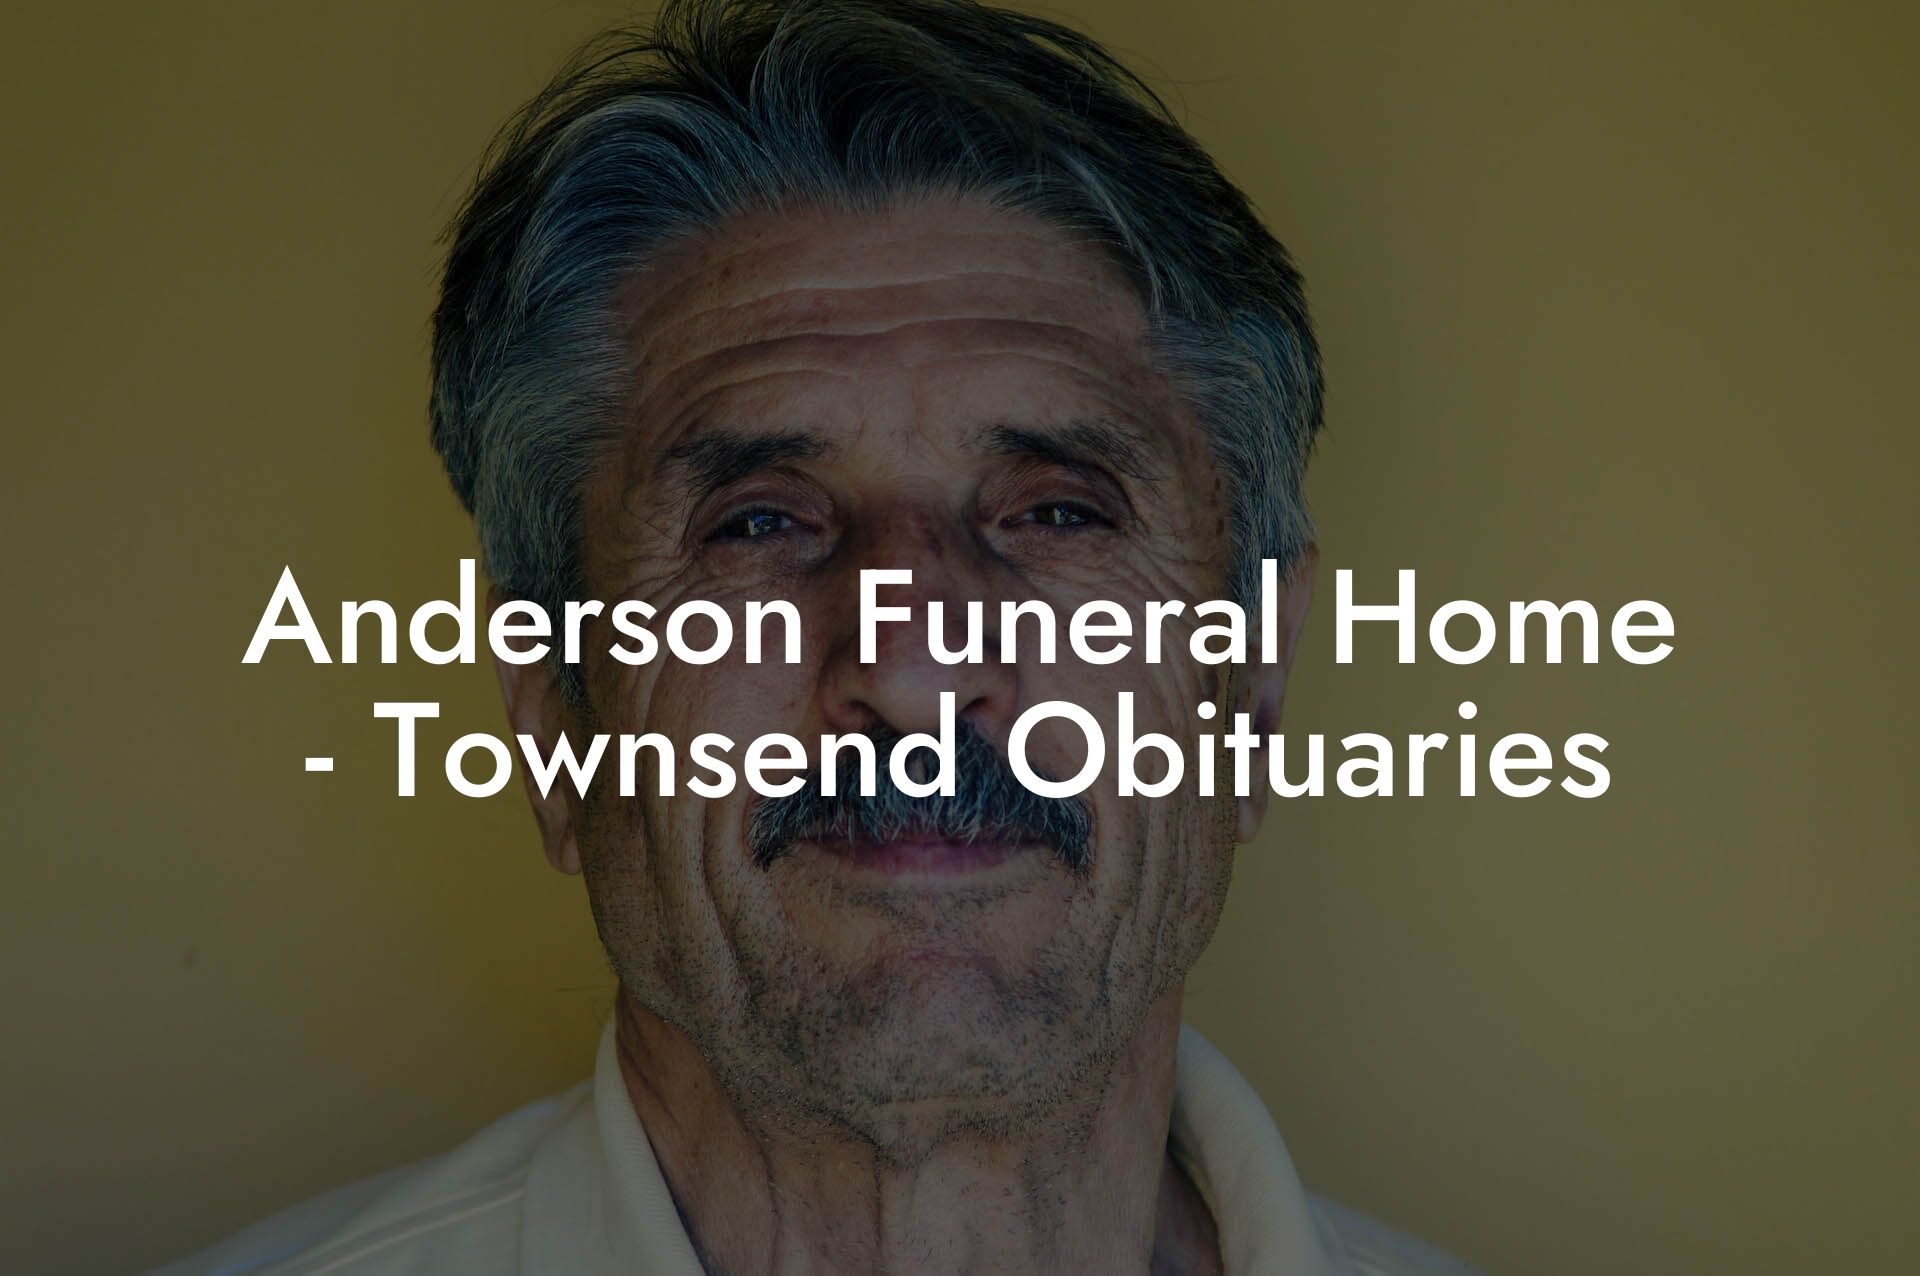 Anderson Funeral Home - Townsend Obituaries